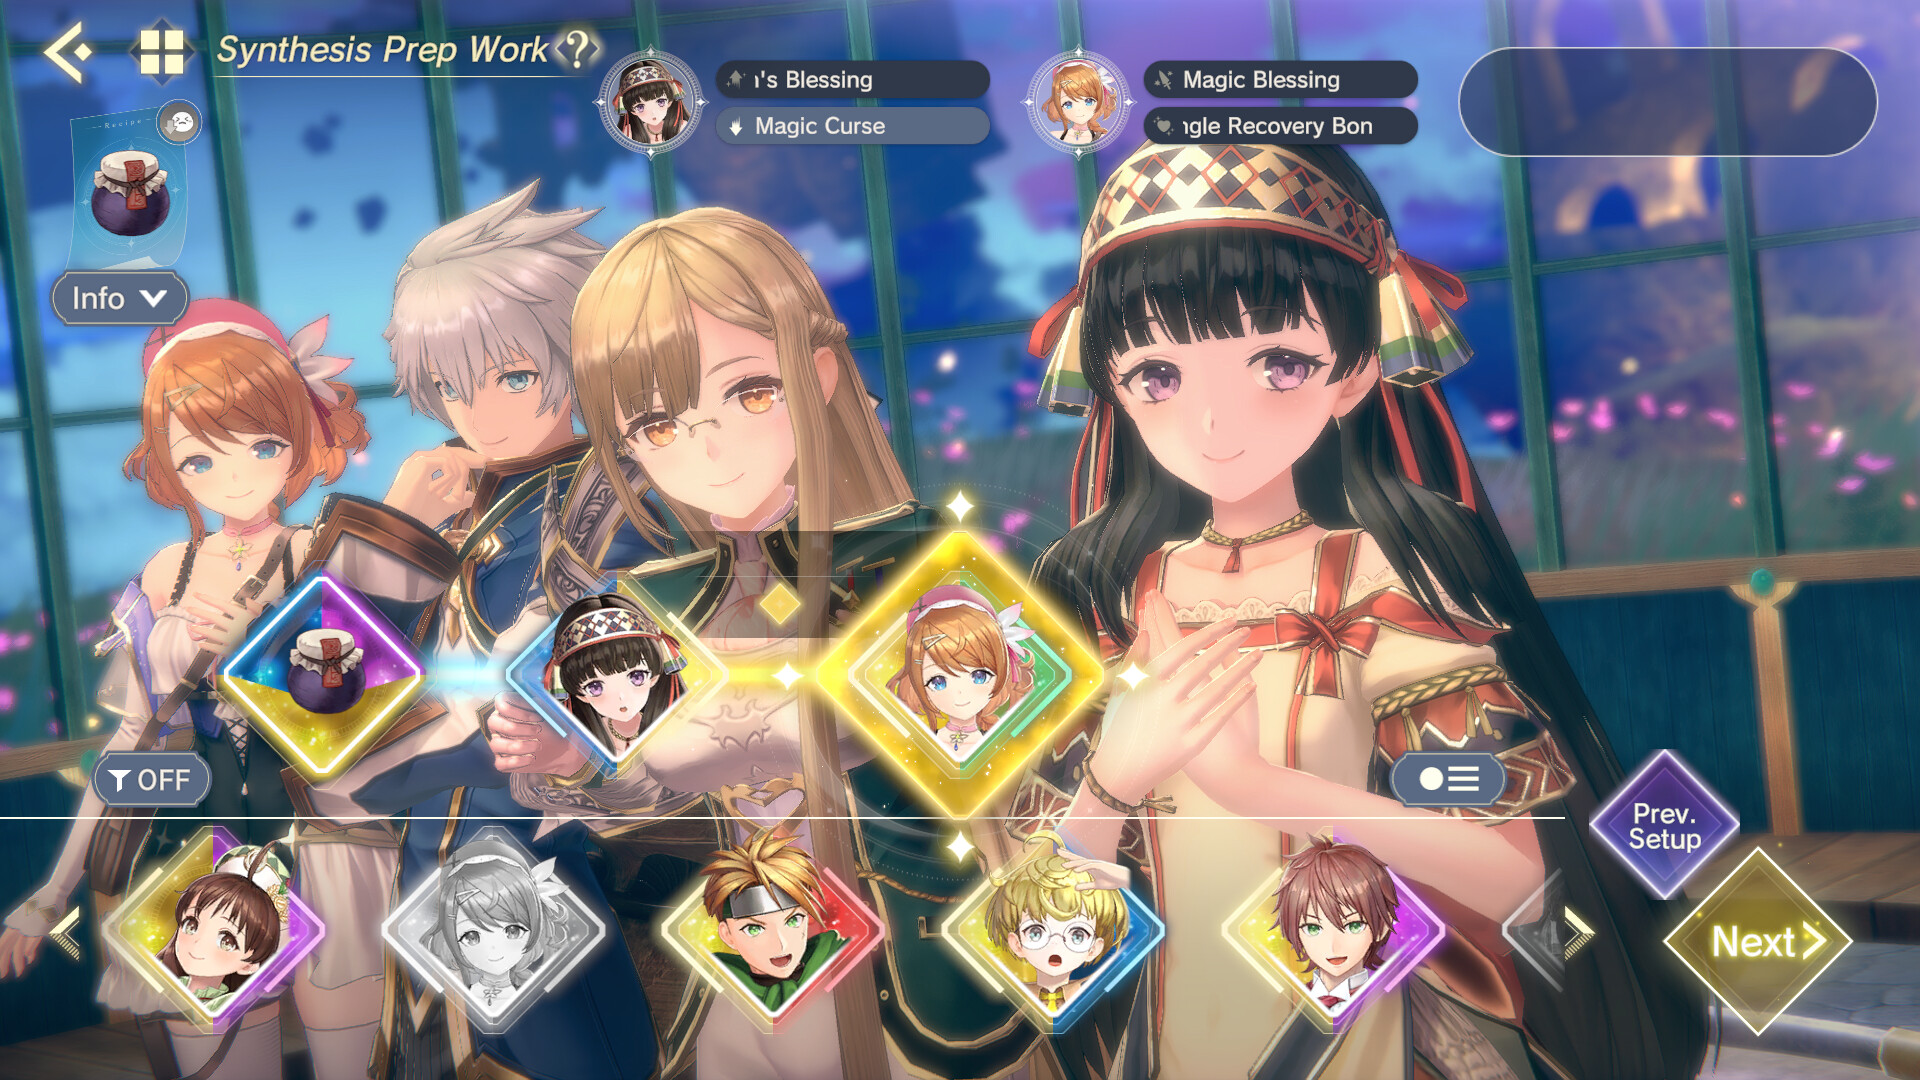 Atelier Resleriana Western Steam Page Live; English Screenshots Revealed